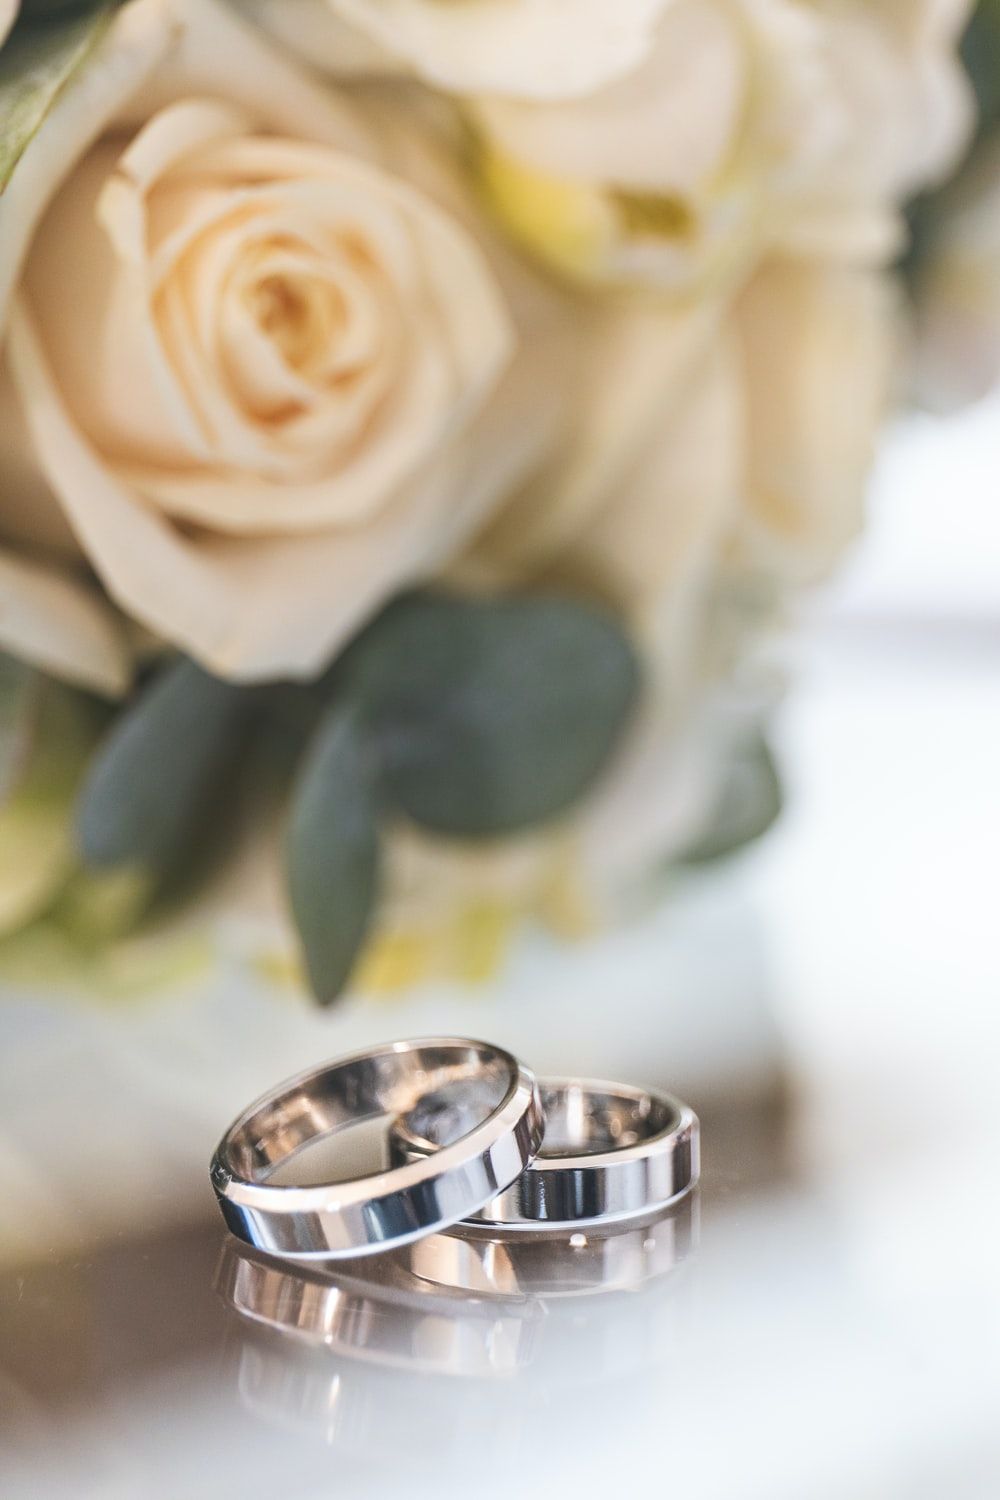 Wedding Ring Picture. Download Free Image